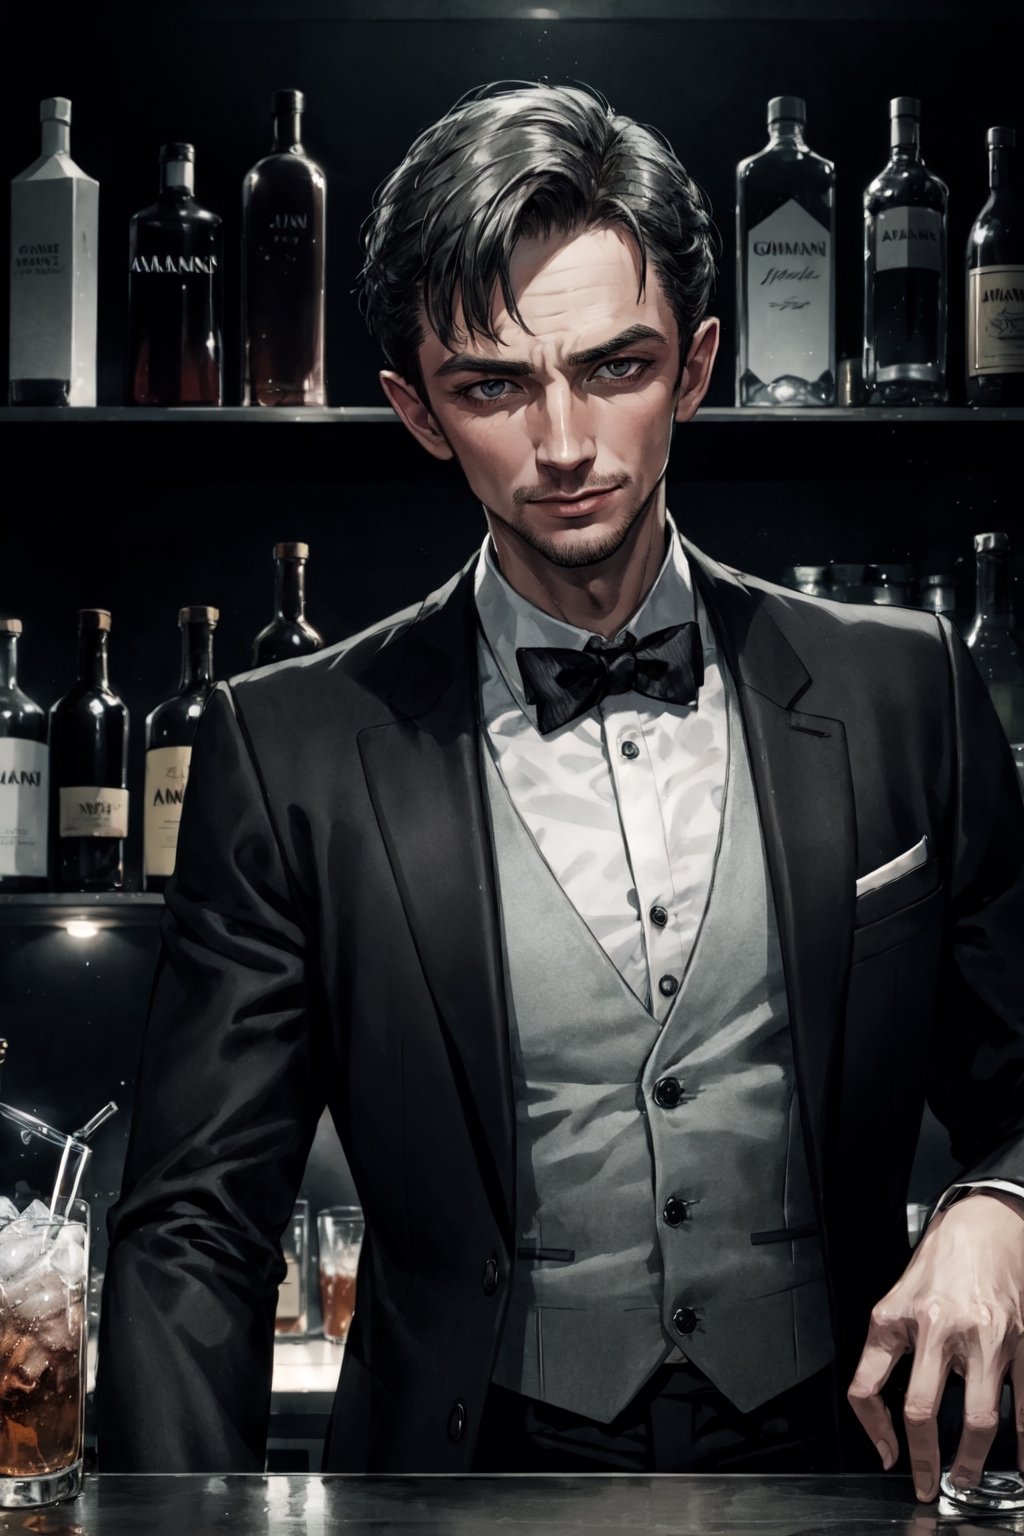 Young James Bond, armani suit, facial portrait, sexy stare, smirked, inside bar, having a drink, women, crowds, 